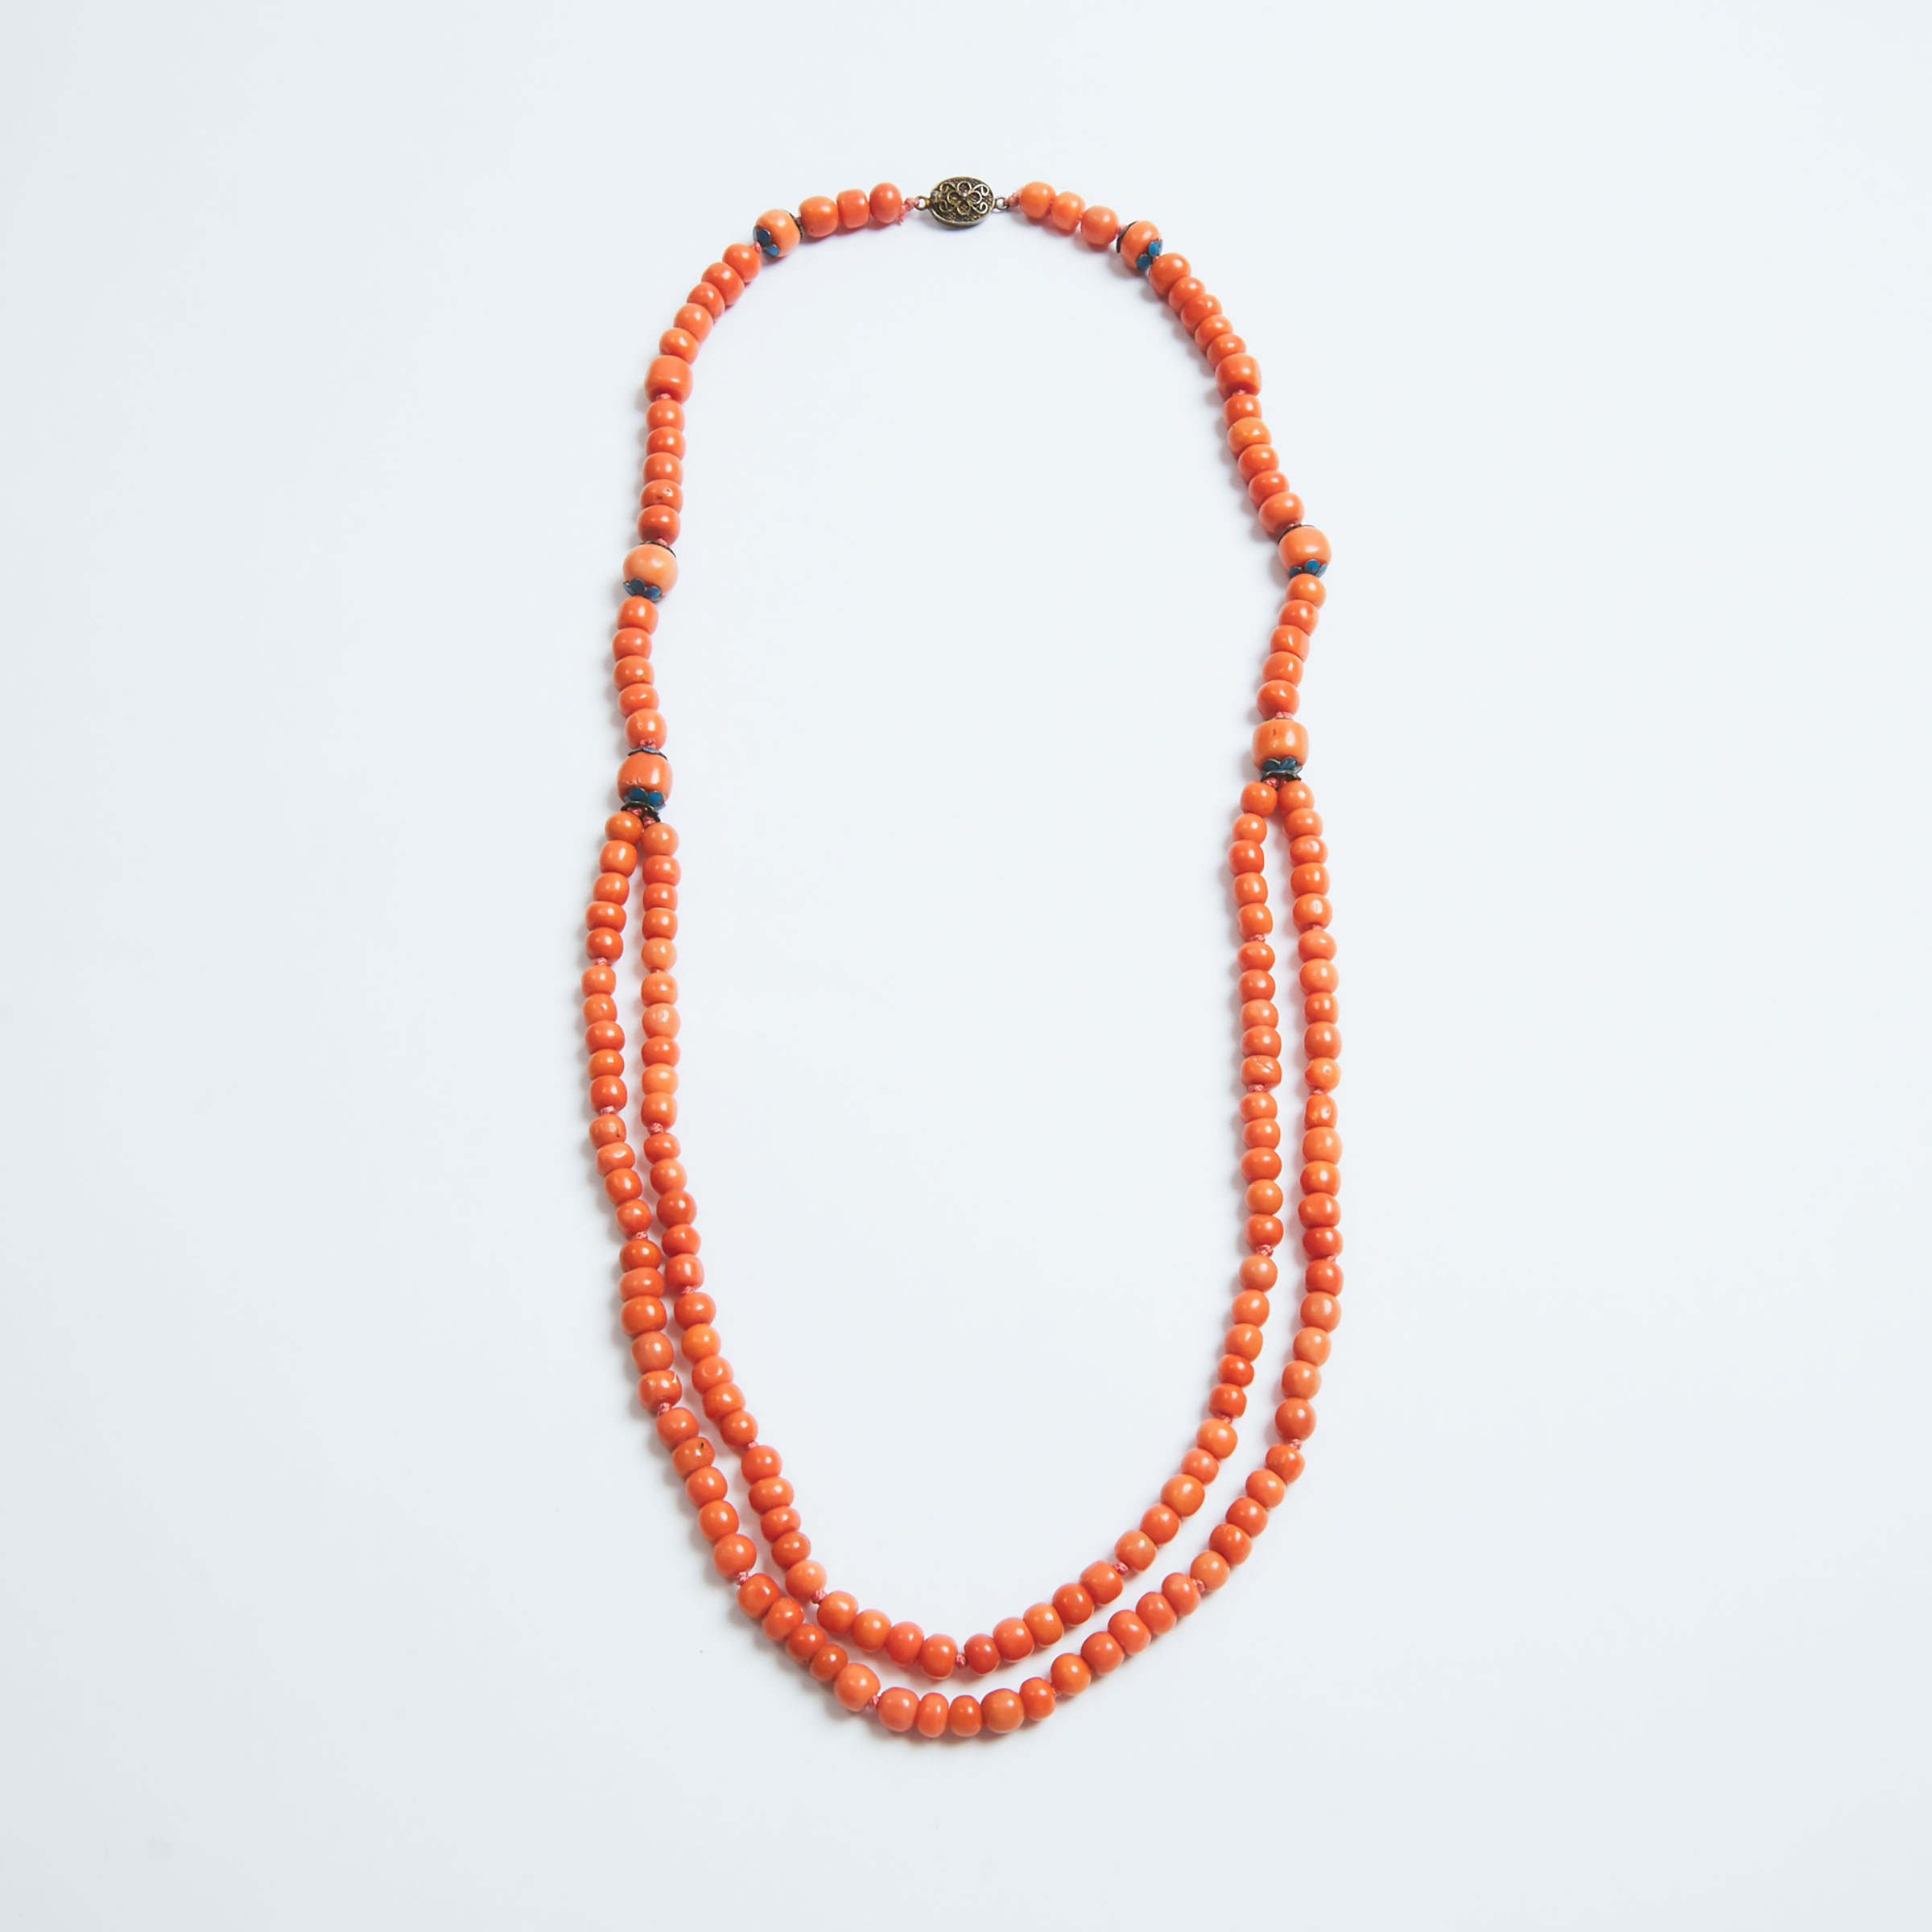 A Coral Beaded Necklace, Republican Period, Early to Mid 20th Century